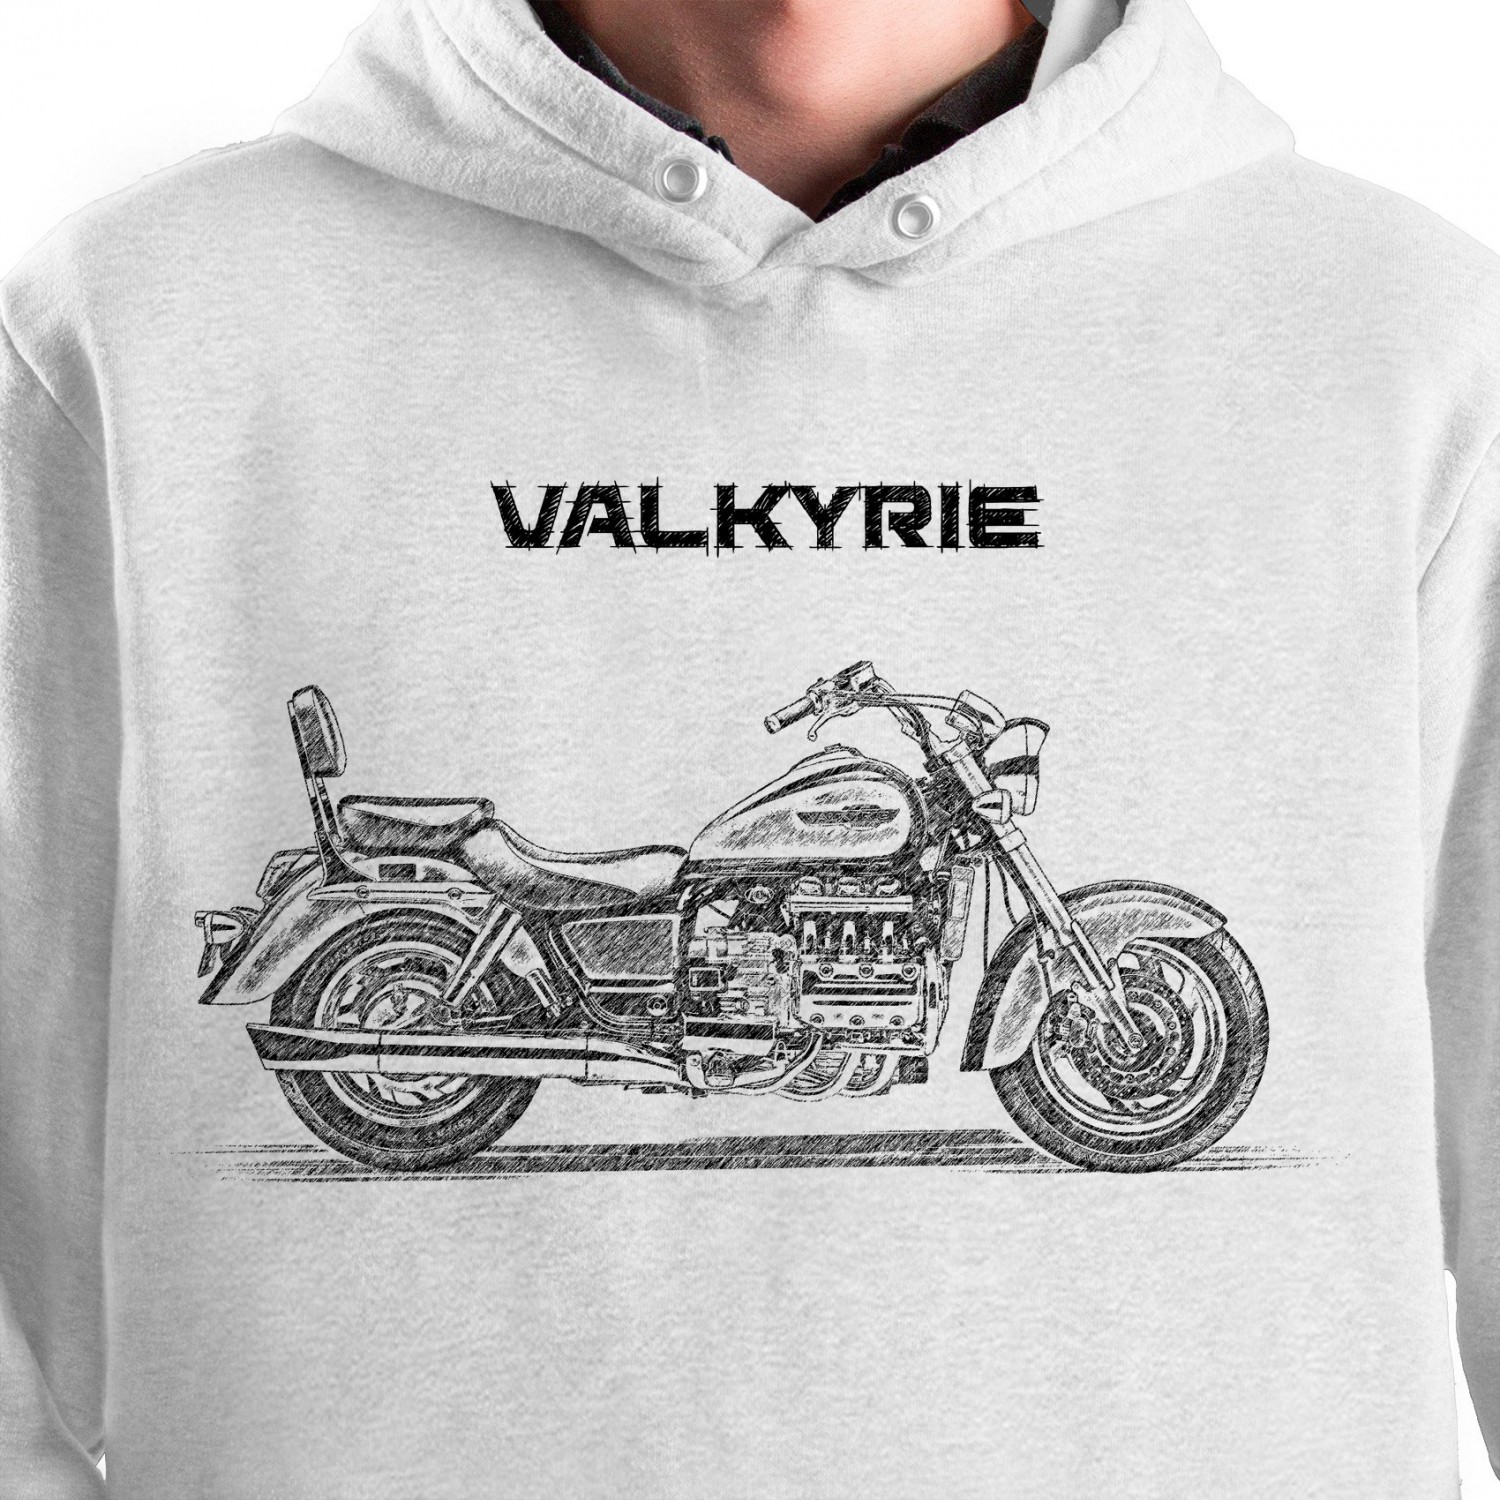 White T-shirt with Honda Valkyrie. Gift for motorcyclist.